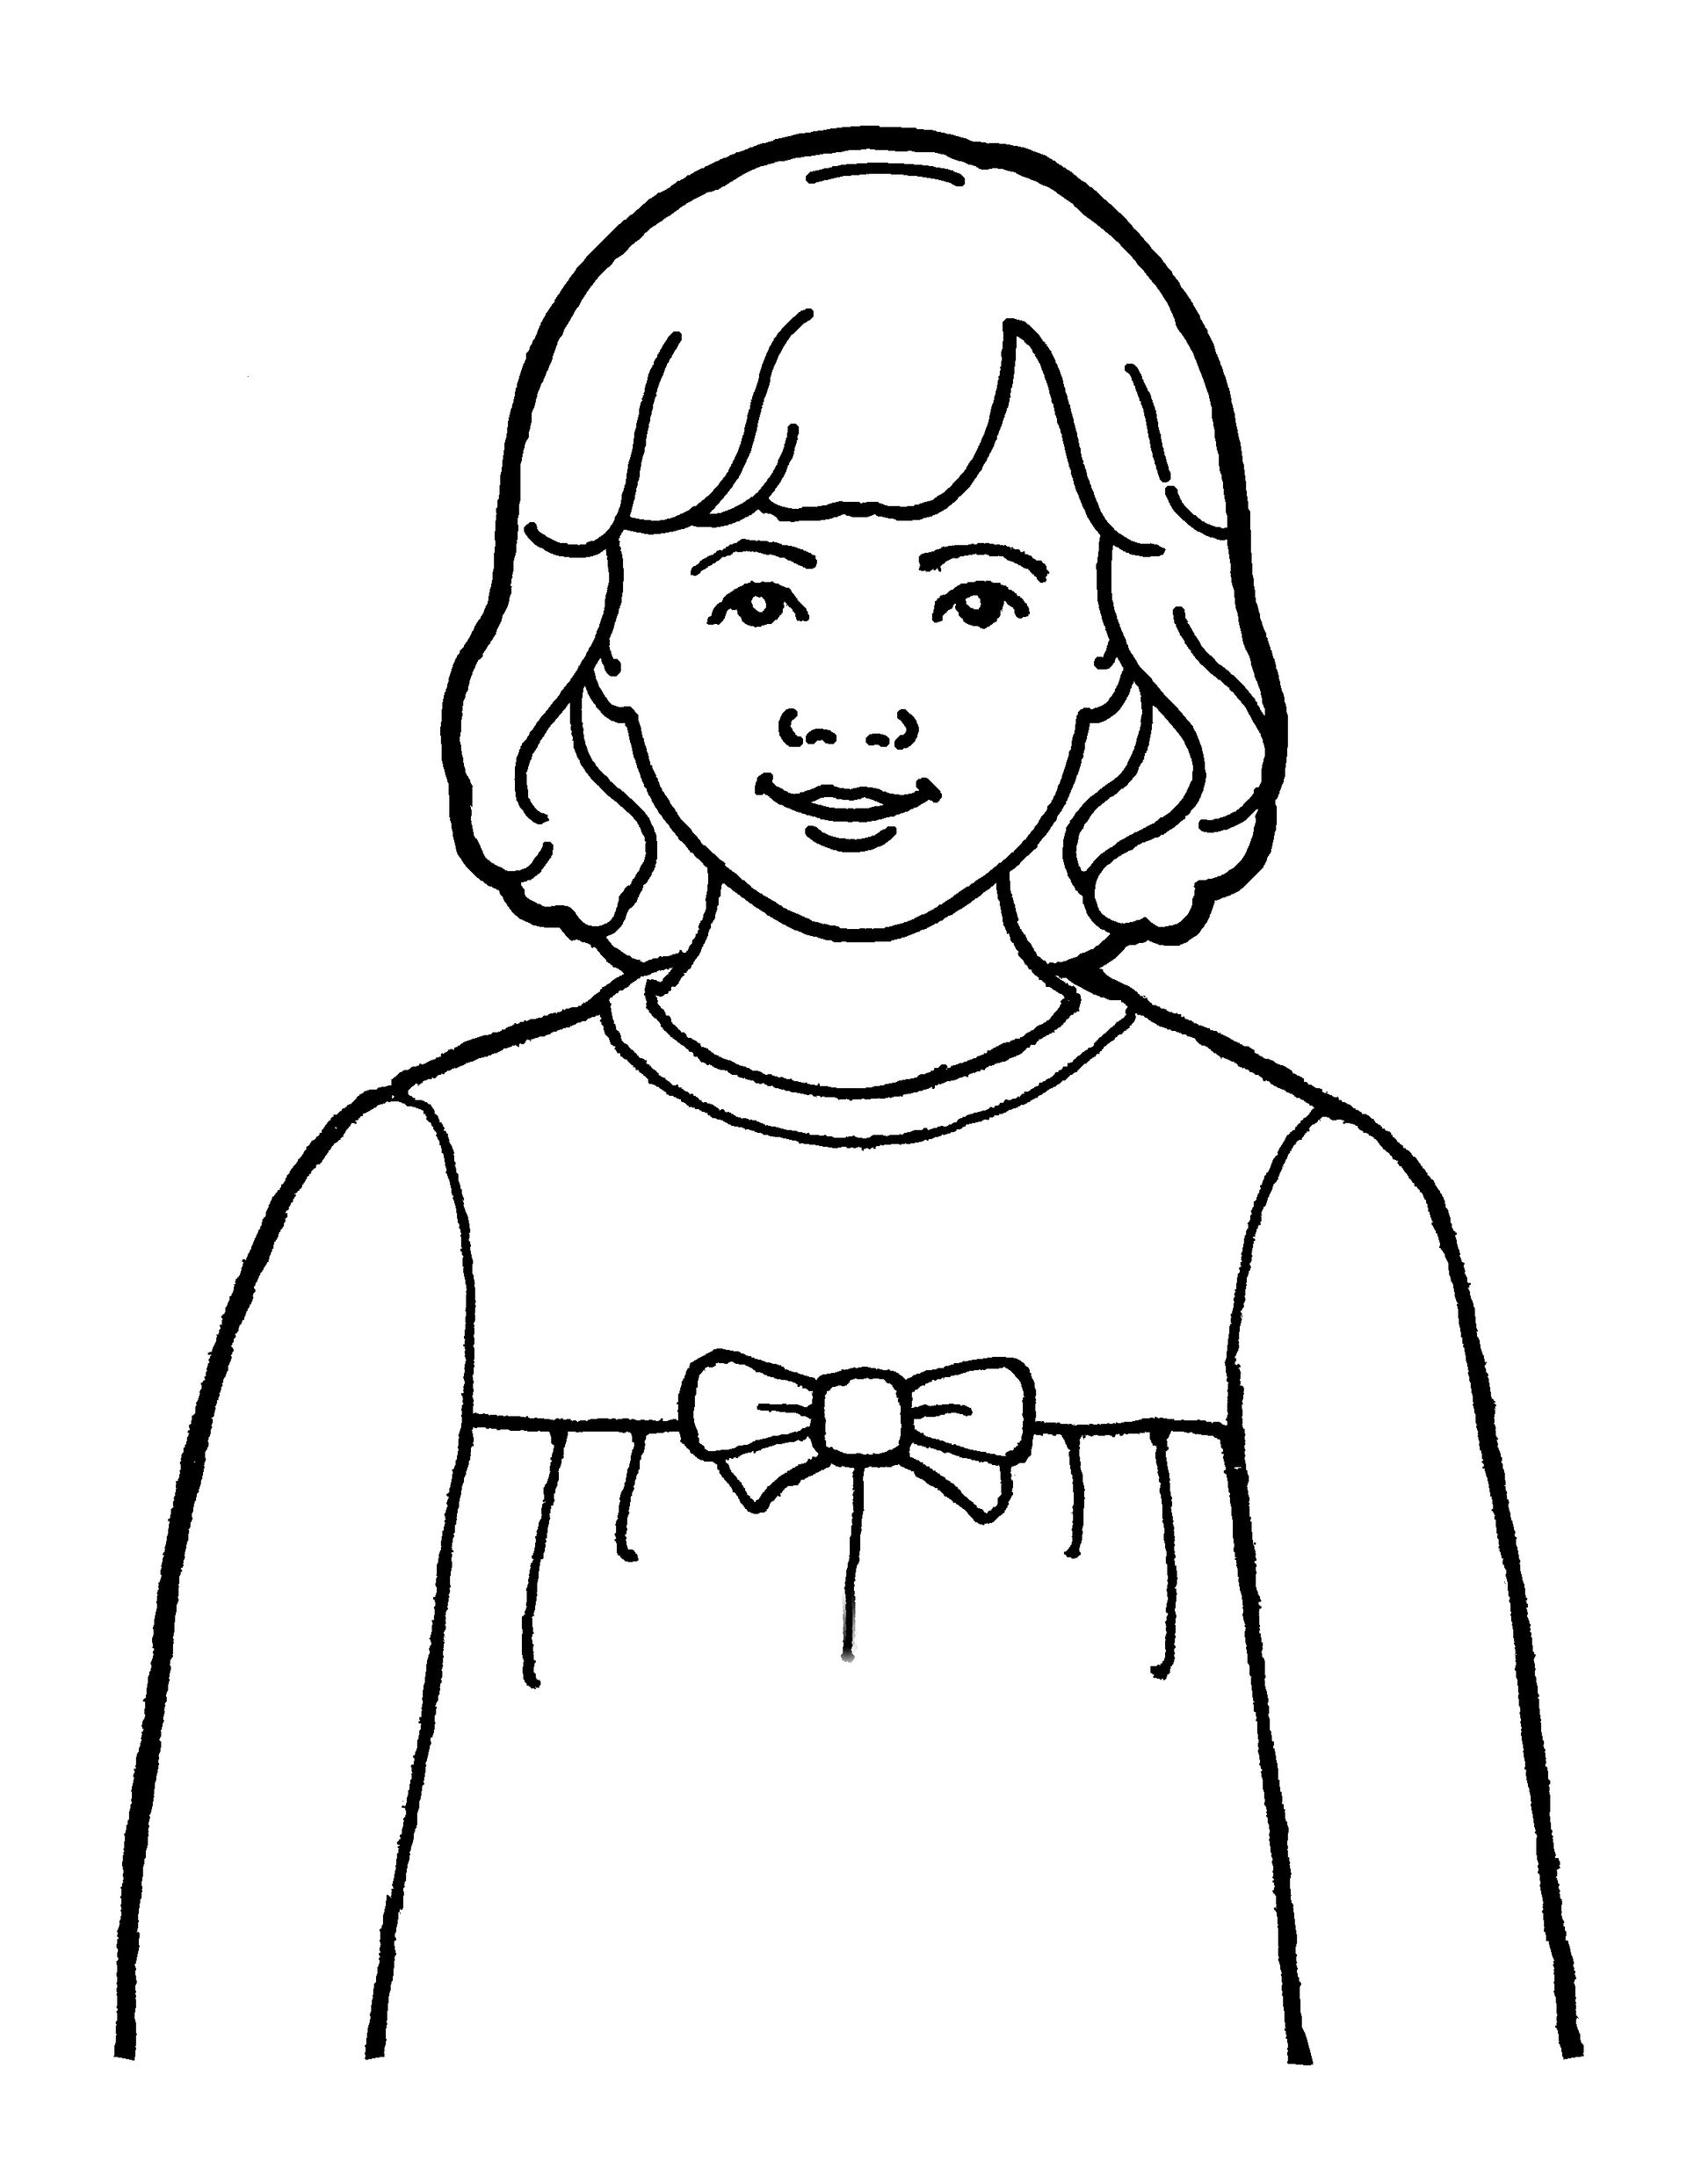 An illustration of a girl or sister, from the nursery manual Behold Your Little Ones (2008), page 59.